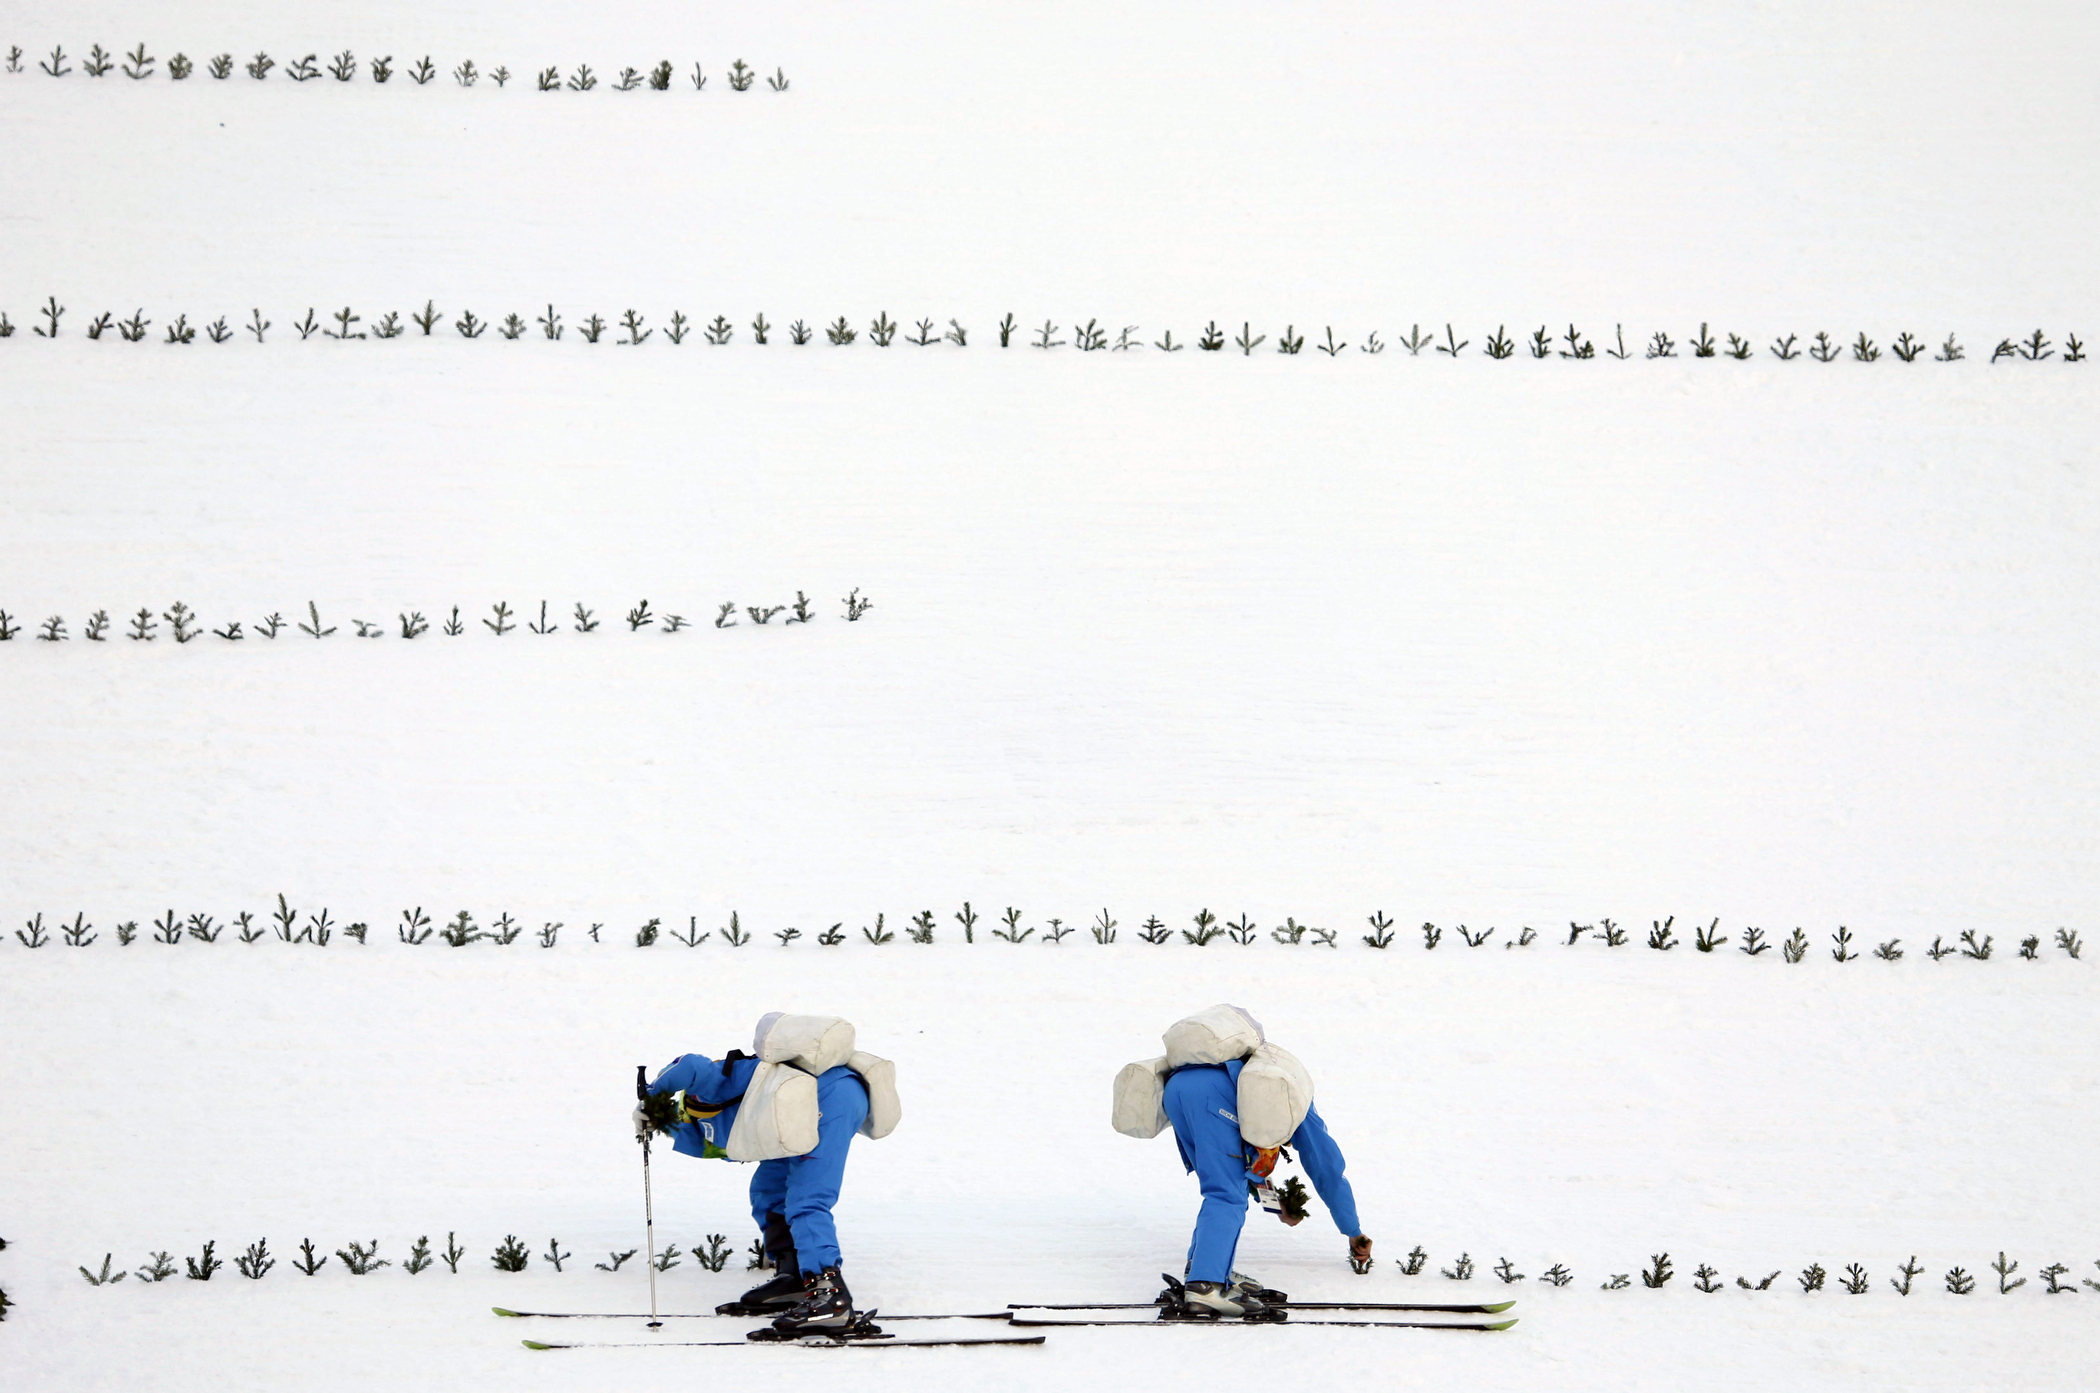 Workers prepare the hill in the ski jumping stadium prior to the 2014 Winter Olympics, Wednesday, Feb. 5, 2014, in Krasnaya Polyana, Russia.